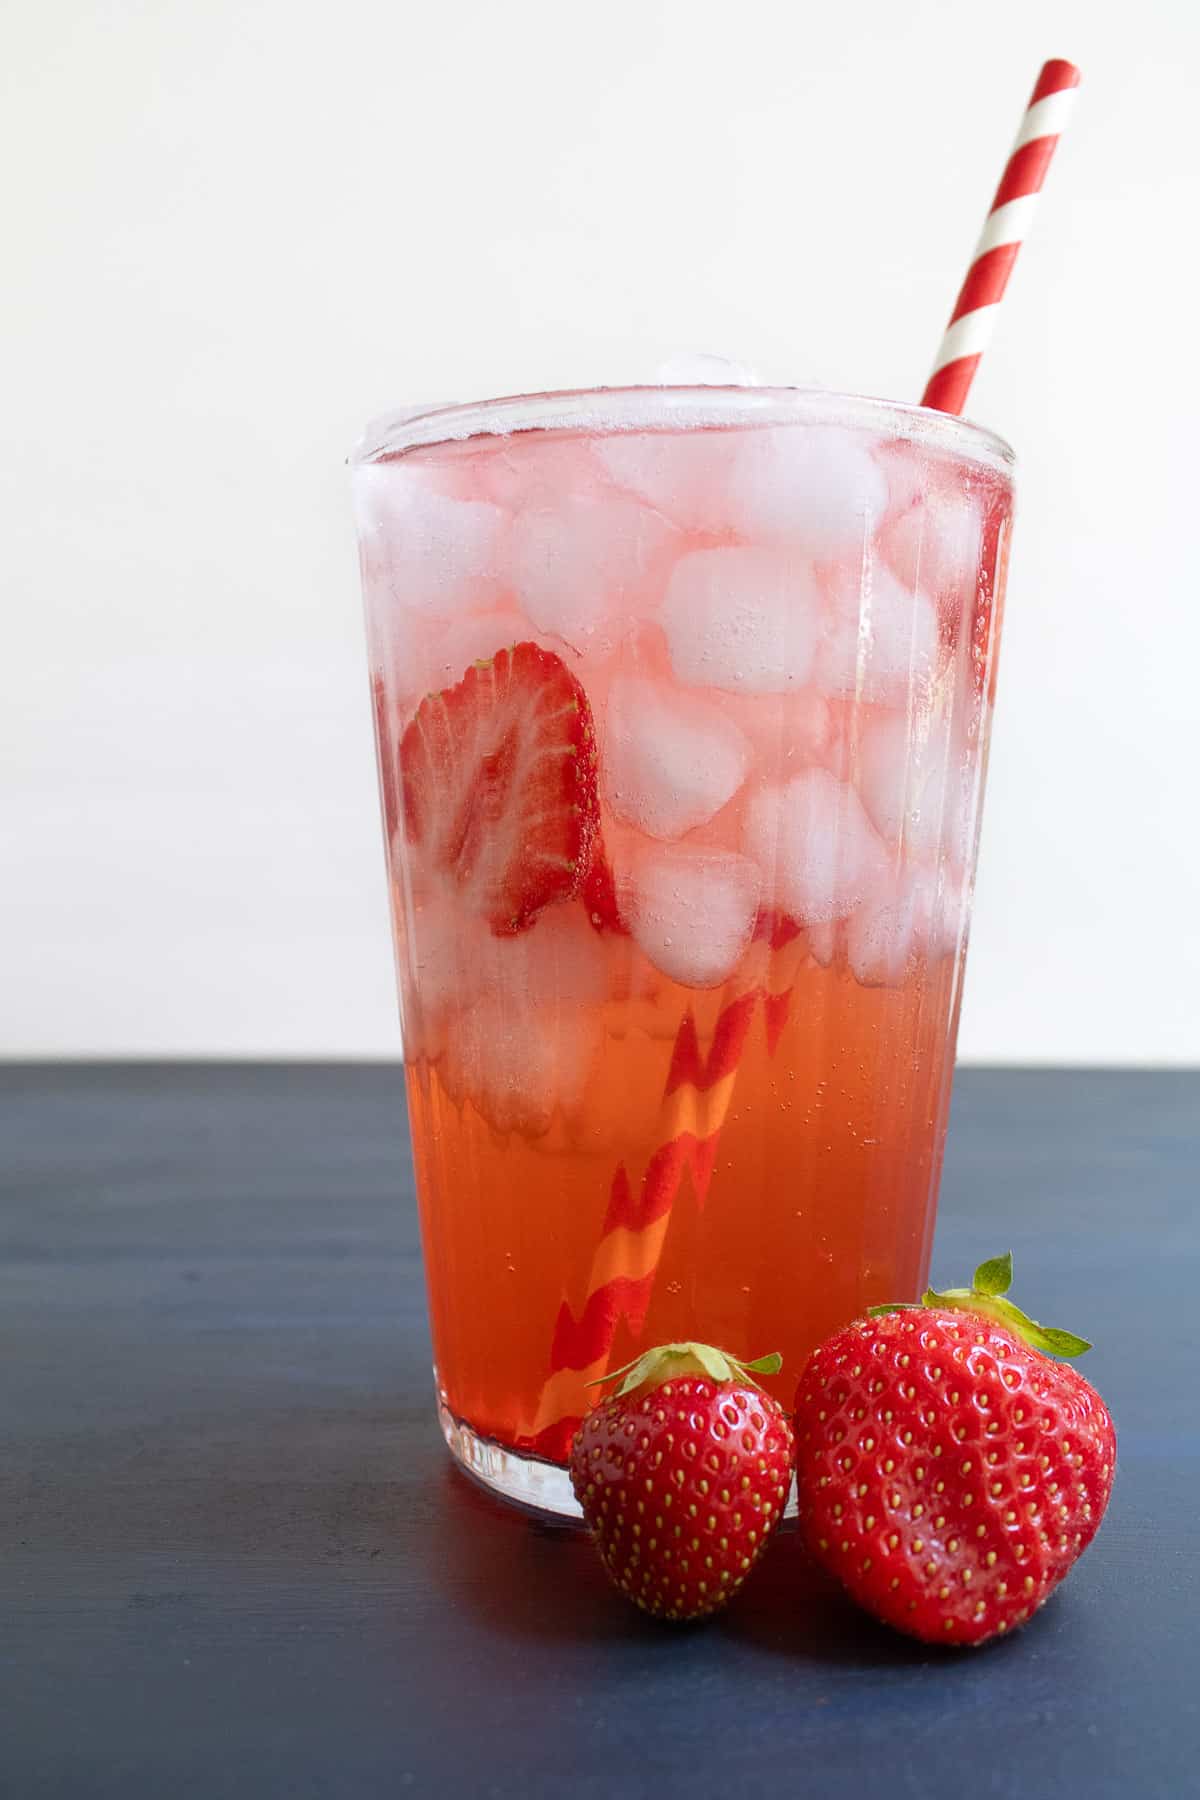 A tall glass of a red beverage with ice and a red and white striped straw sits on a blue surface alongside two fresh strawberries.